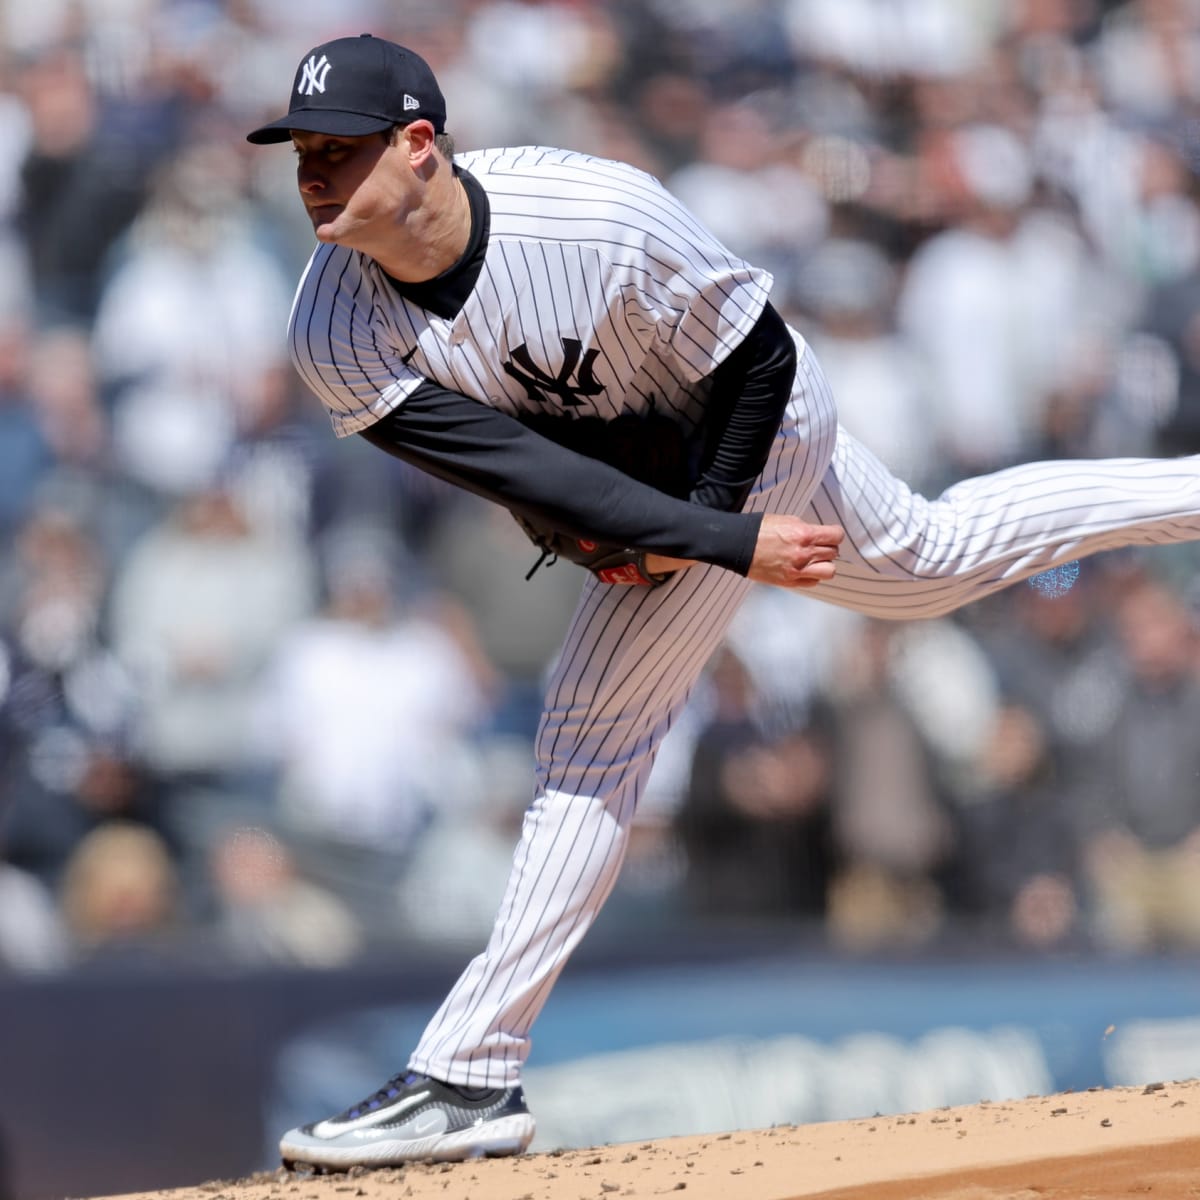 Yankees, White Sox lineups Monday  Gerrit Cole vs. Dylan Cease 